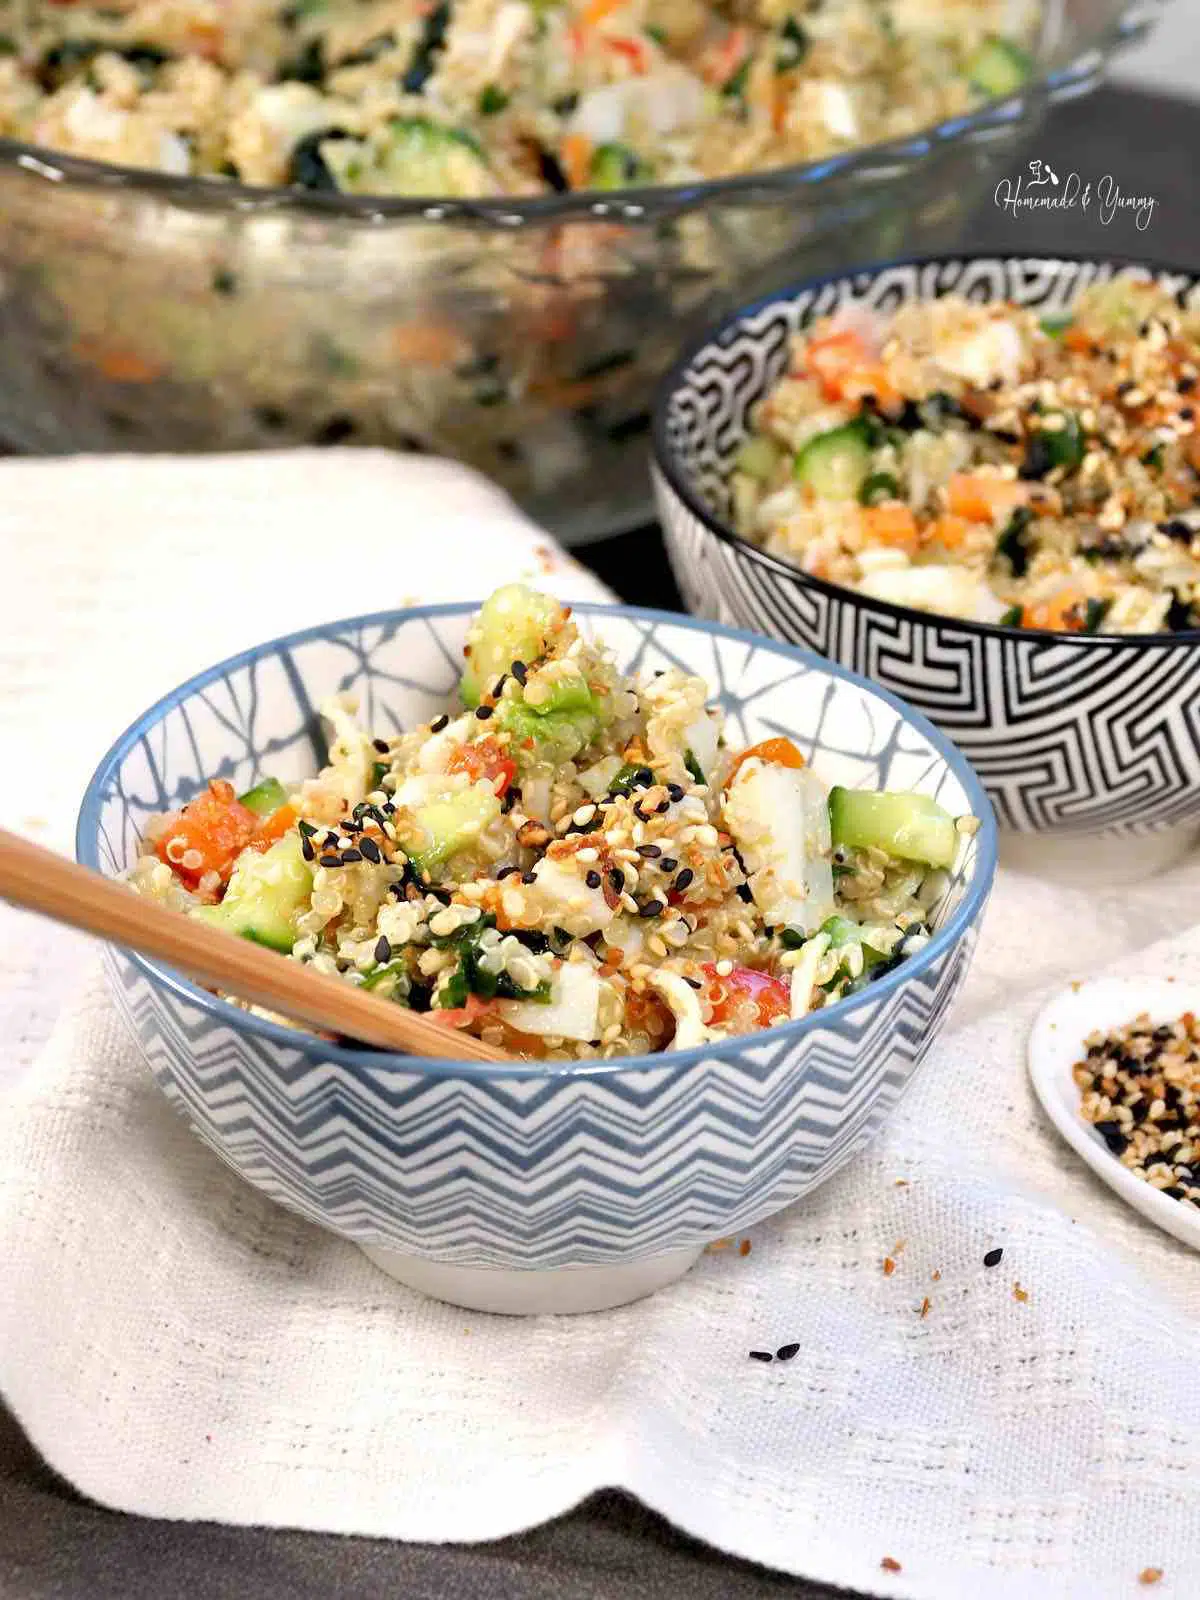 Sushi quinoa salad in a blue and white bowl.